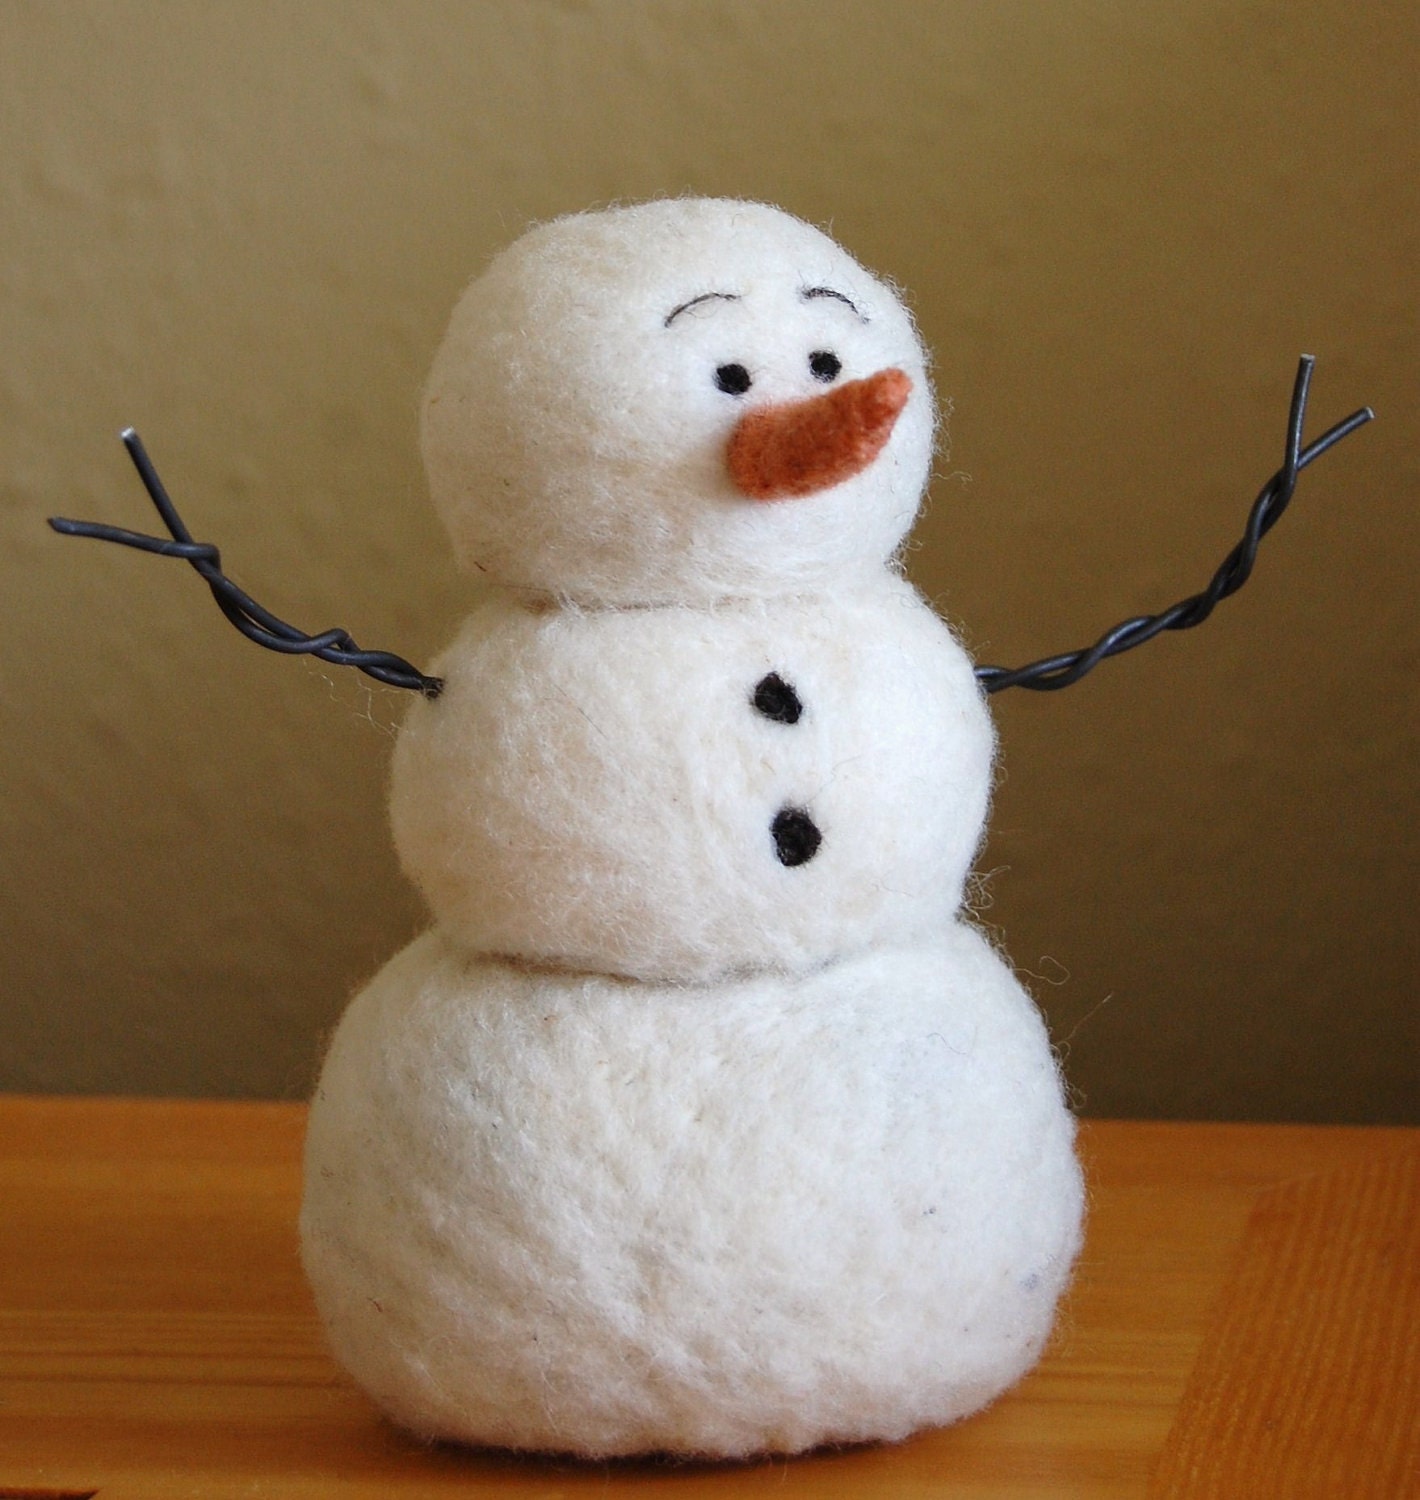 Needle Felting kit, Needle Felted Snowman instructions and supplies